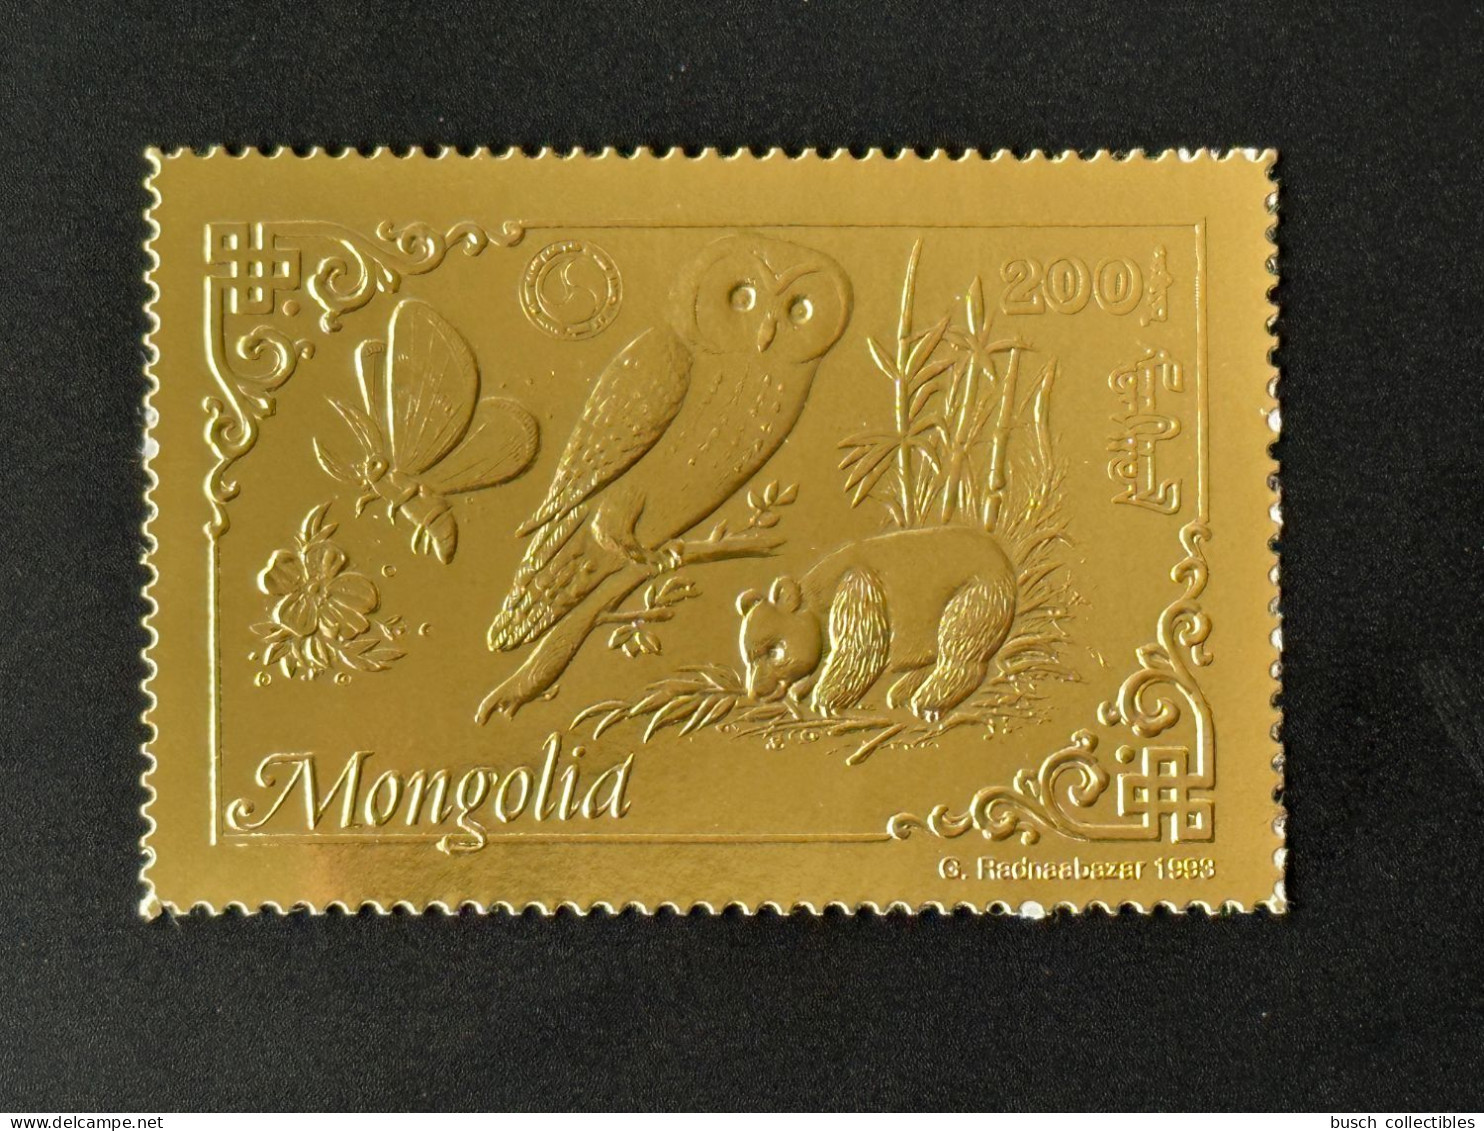 Mongolie Mongolia 1993 Mi. 2475 A Or Gold Rotary Lions Butterfly Owl Eule Panda Papillon Schmetterling Chouette - Rotary, Lions Club